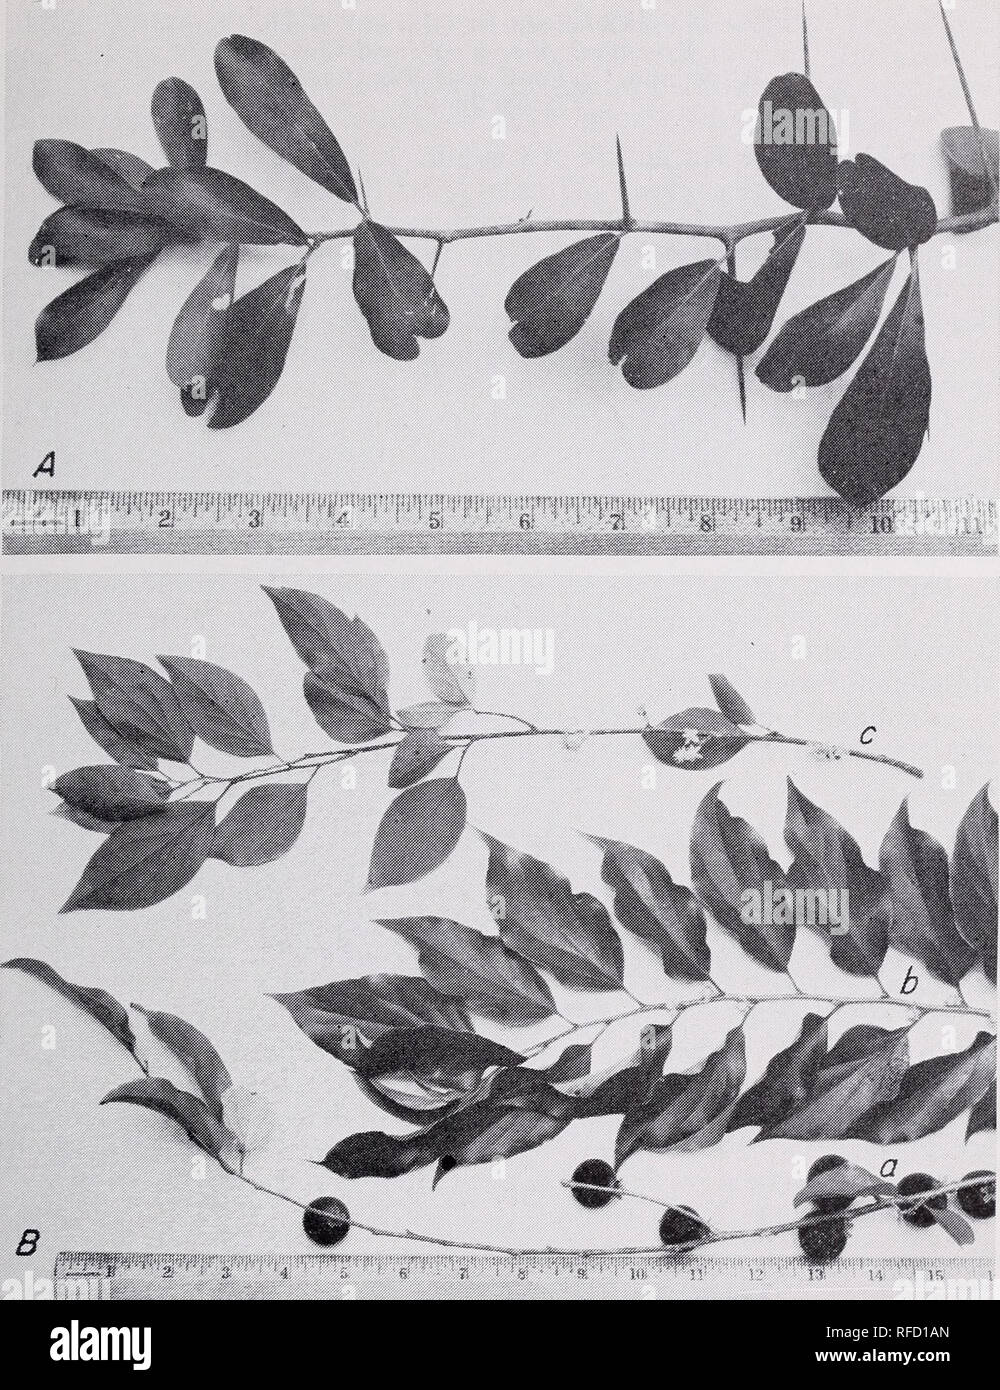 . Some ornamental shrubs for the Tropics. Shrubs Tropics. SOME ORNAMENTAL SHRUBS FOR THE TROPICS 57. Figure 30, A.—The kei-apple or umkokolo, Dovyalis caffra, is a large shrub which is better suited to higher elevation in the Tropics. B.—The kitembilla, D. hebecarpa, is a tall wide-spreading shrub. a, A branch with ripe fruit; 6, a branch carrying female flowers; and c, male flowers produced on separate plants. The leaves are dark green, up to 3 inches long, and are widest near the tips where there is a minute notch. They form singly or oh short spurs along the stem. The smooth-barked stems ma Stock Photo